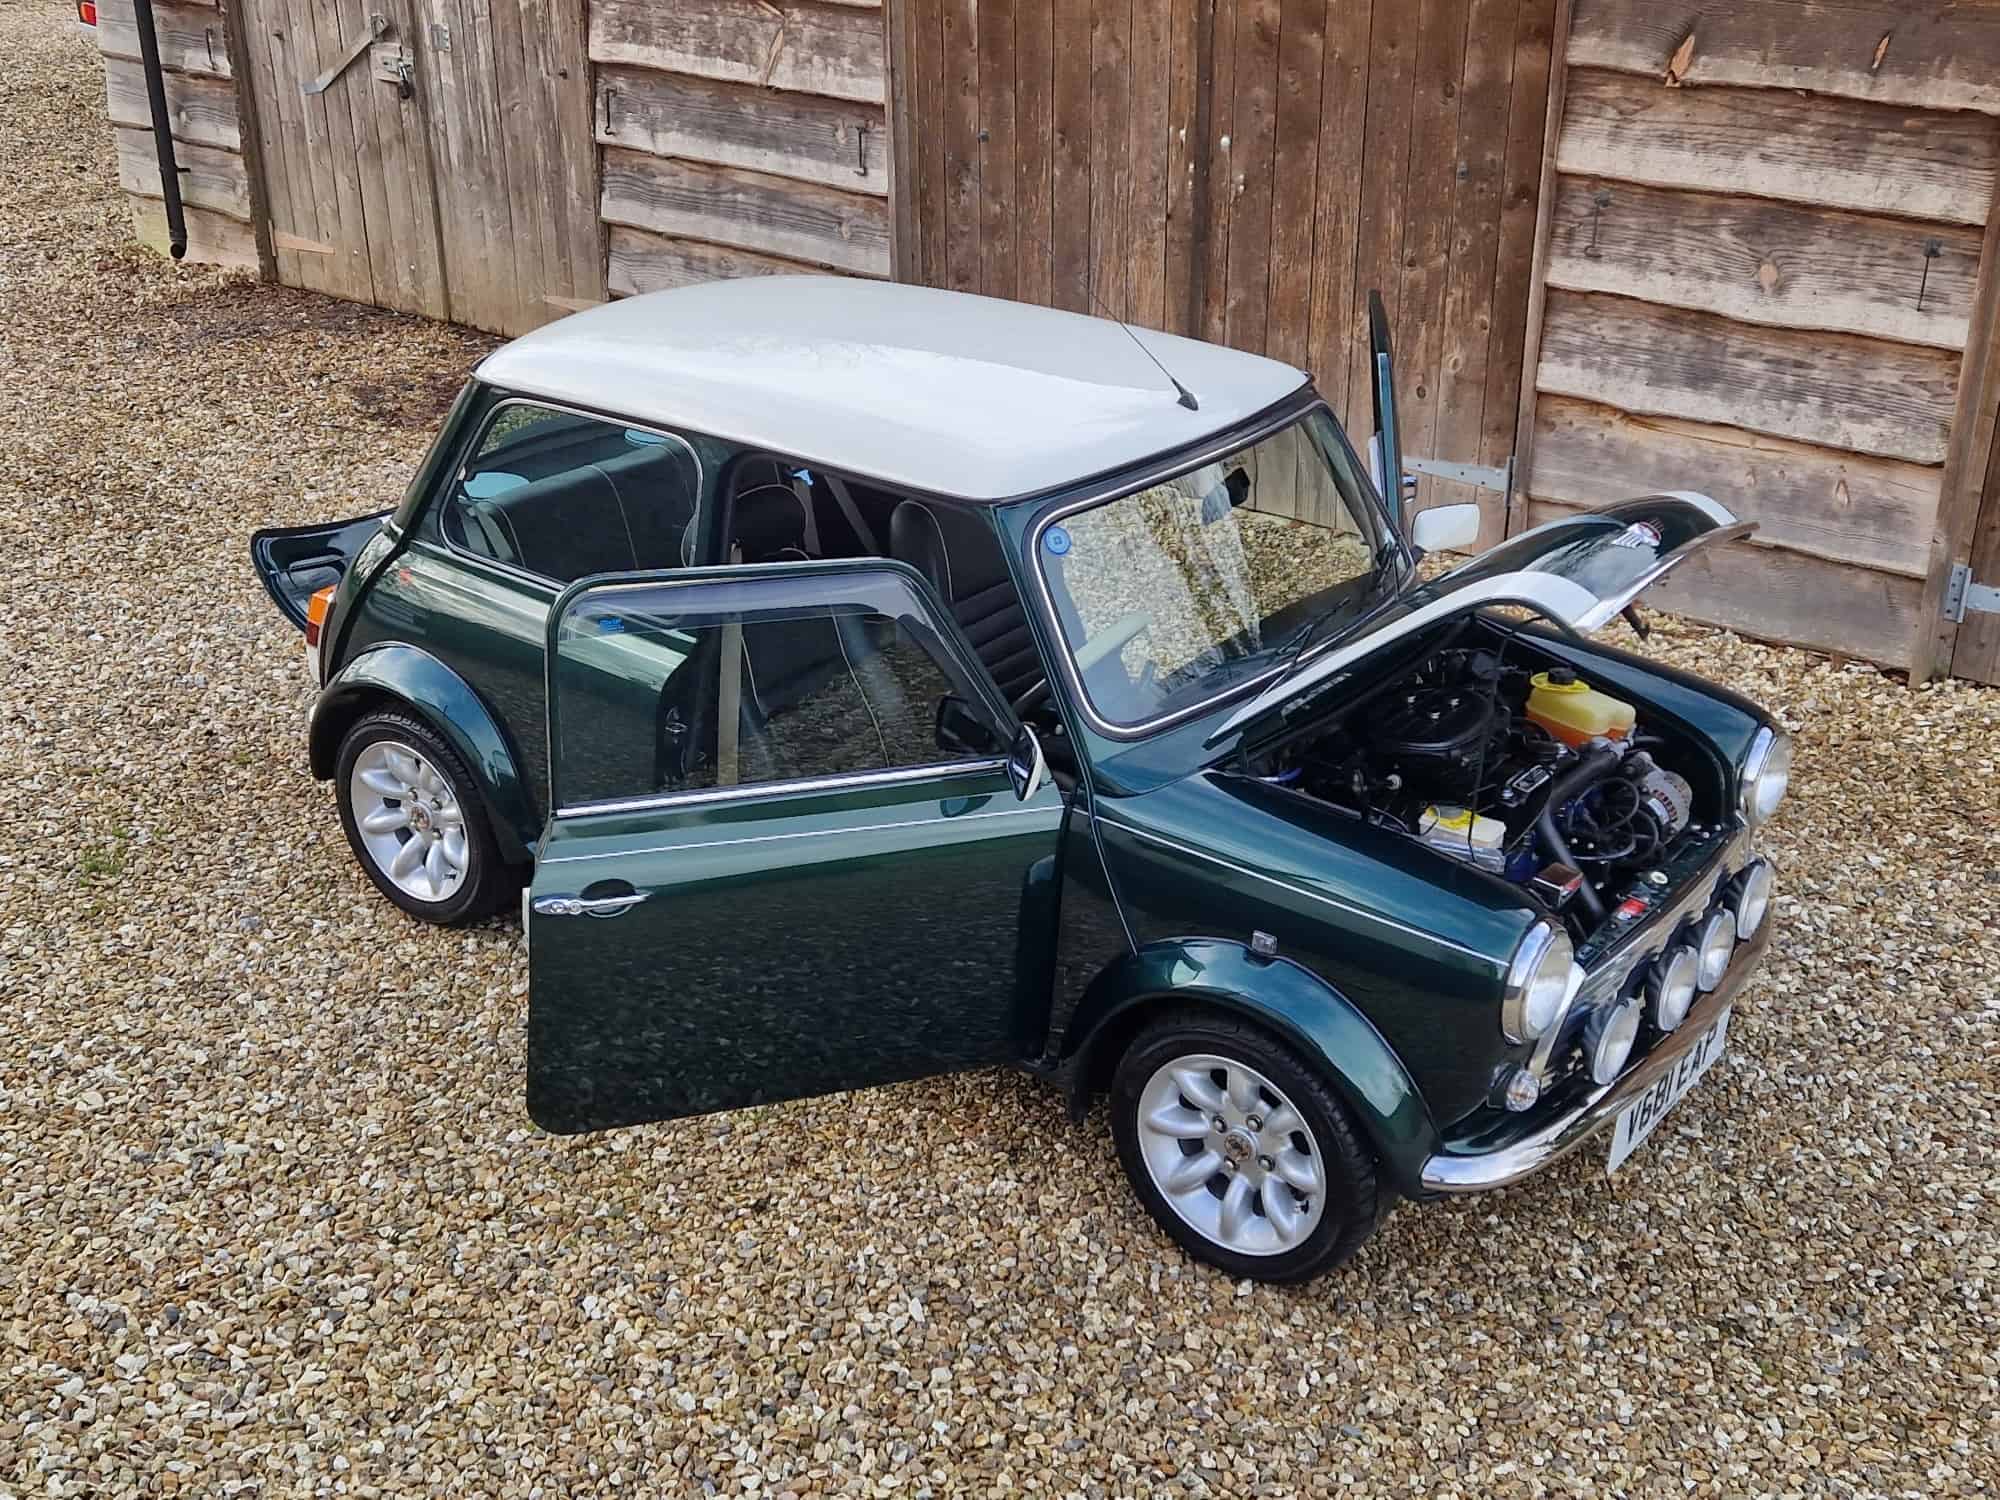 ** NOW SOLD ** Very Rare and Collectable 1999 John Cooper Garages Factory S Works Mini